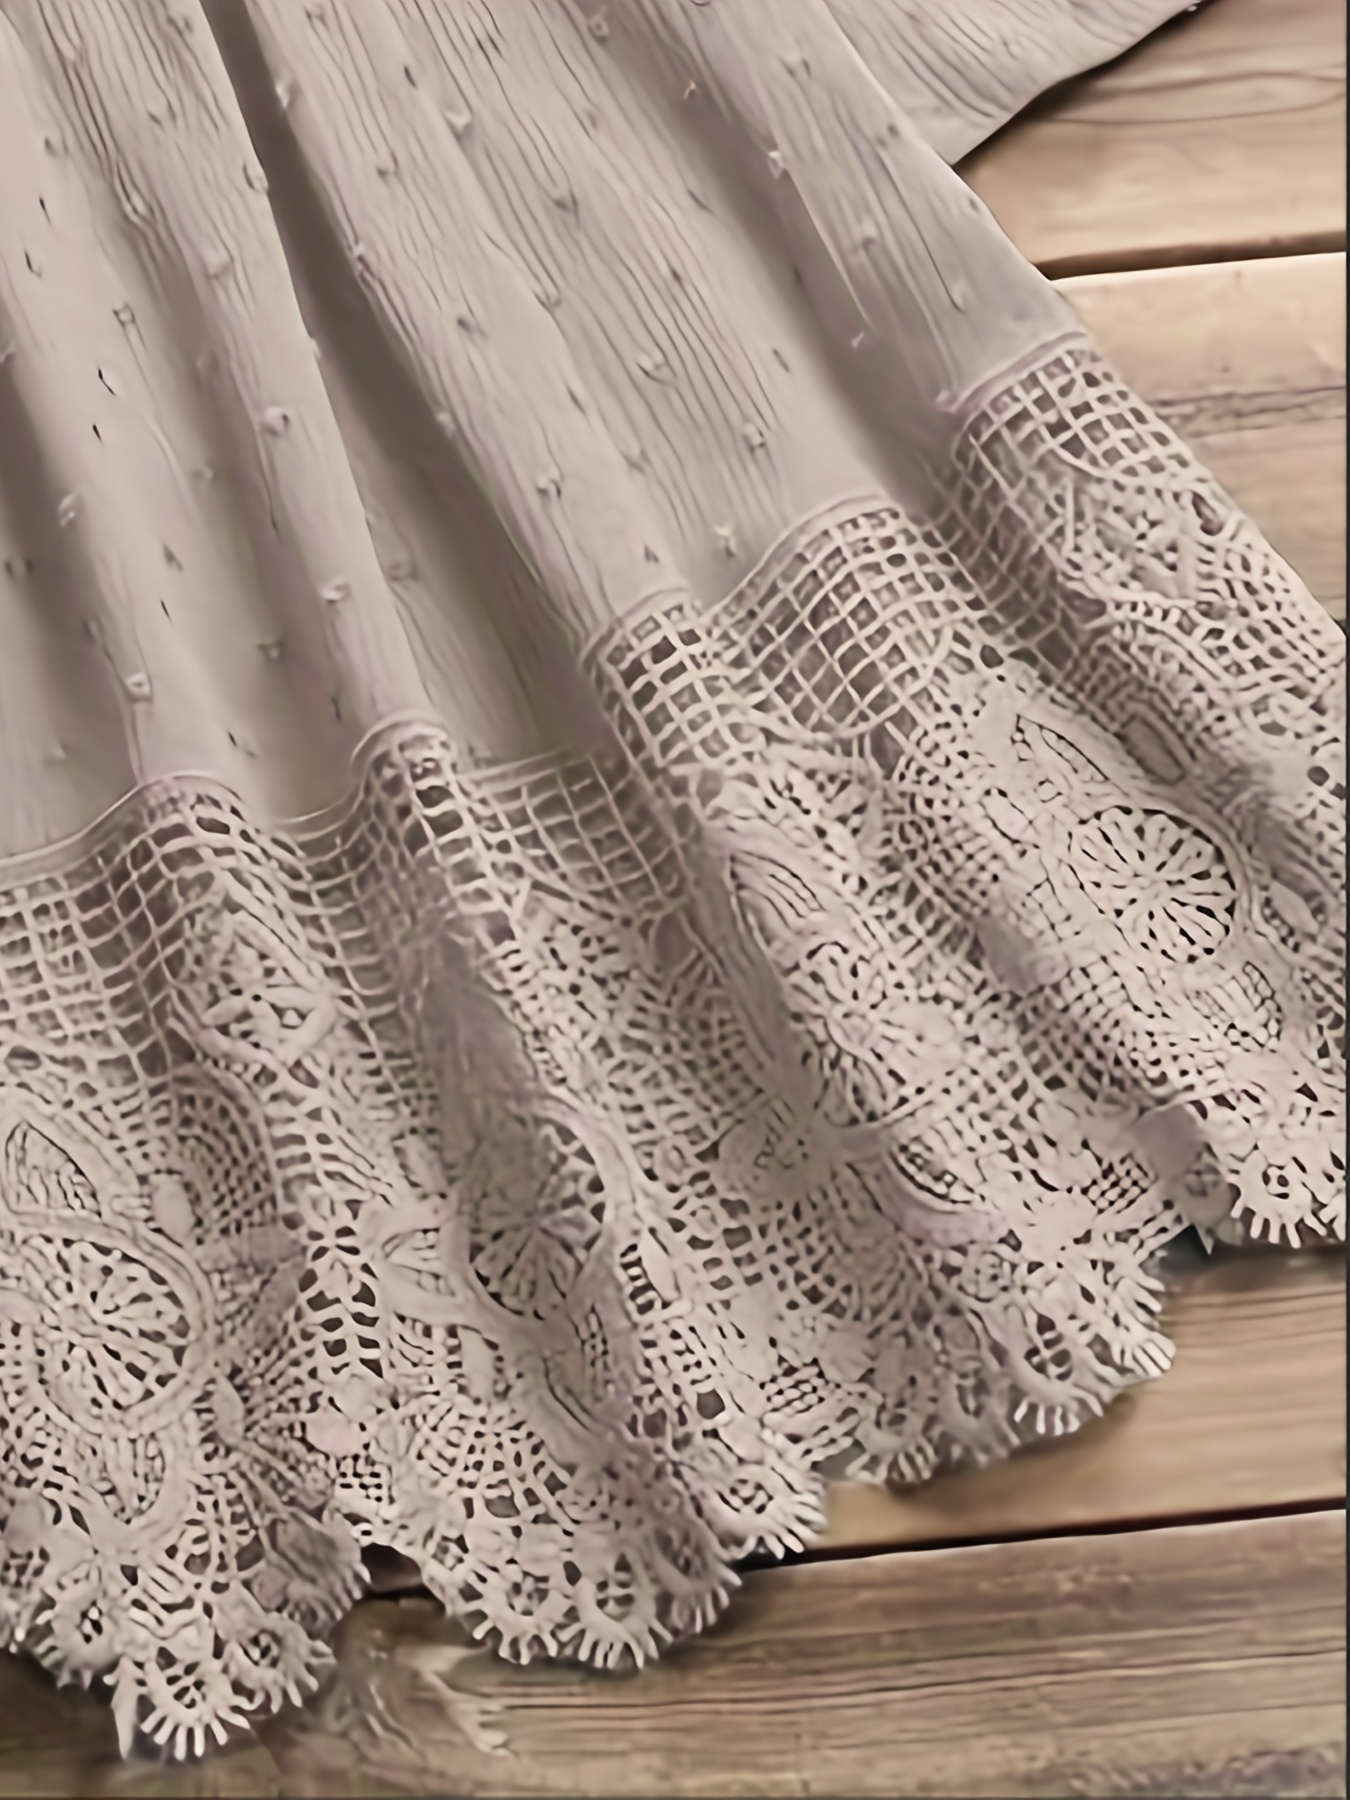 Off White Cotton Fabric Retro Eyelet Cotton Fabric for Eyelet Dress,  Blouse, Shirtdress or Curtains -  Canada